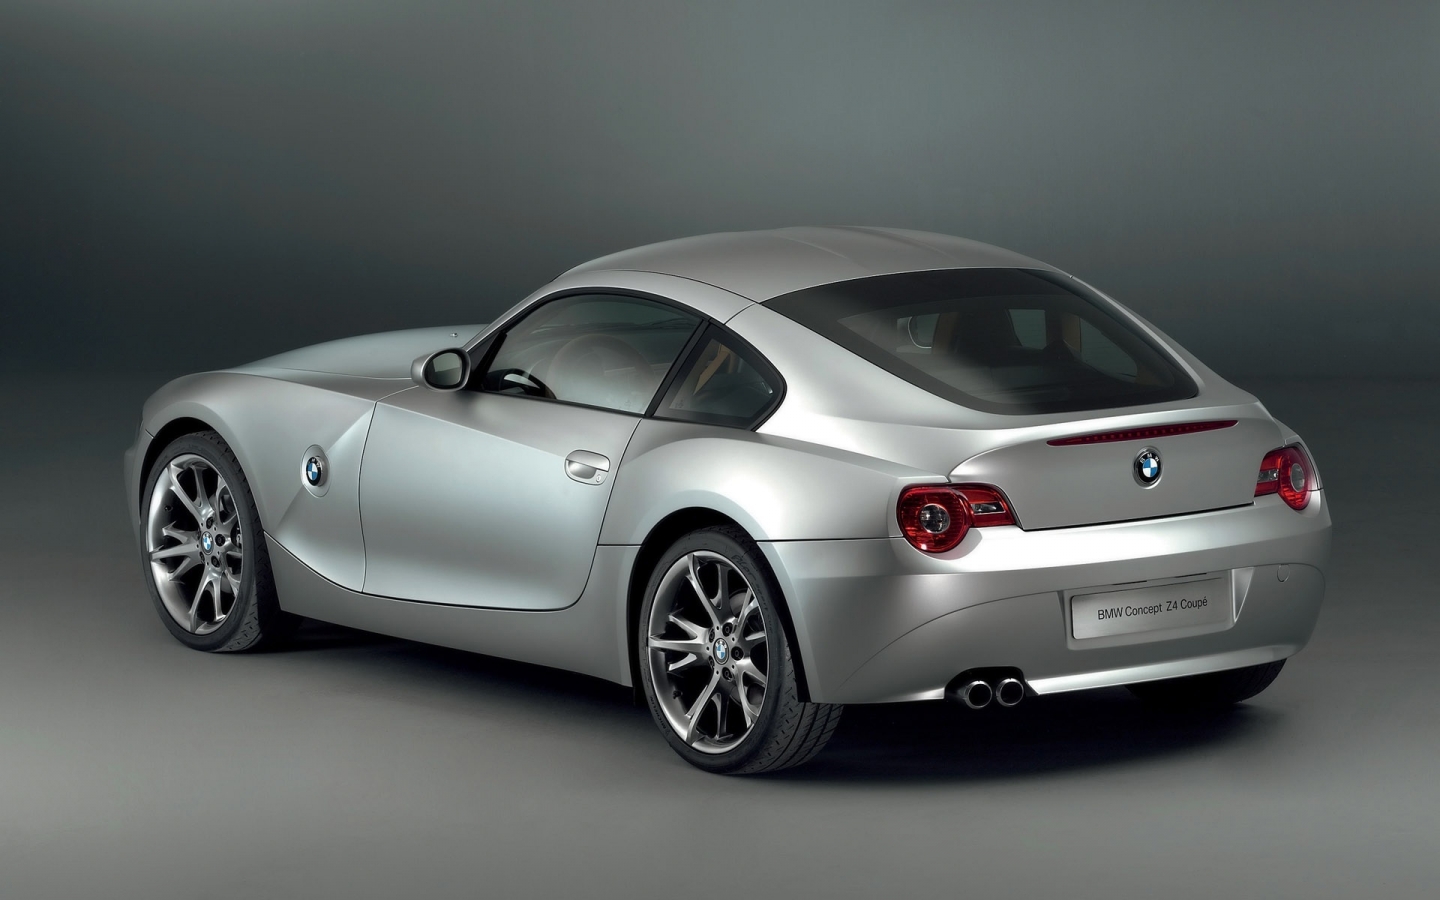 BMW Z4 Coupe Concept RA 2005 for 1440 x 900 widescreen resolution